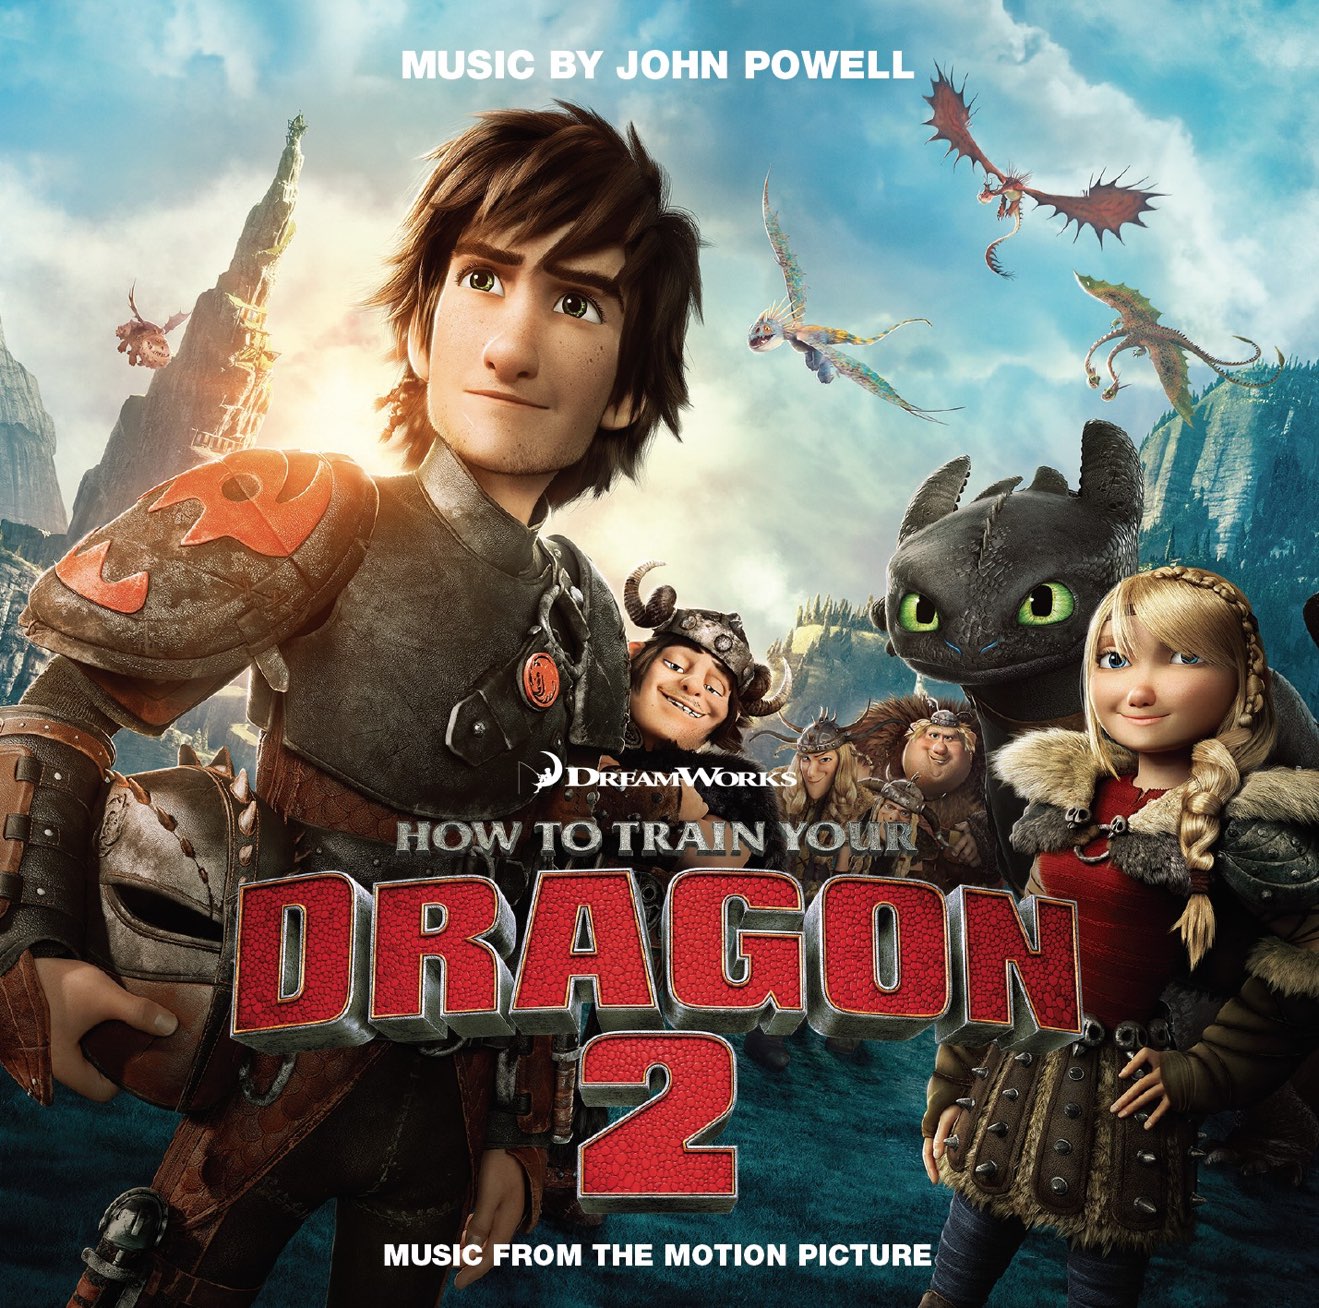 John Powell – How to Train Your Dragon 2 (Music from the Motion Picture) (2014) [iTunes Match M4A]